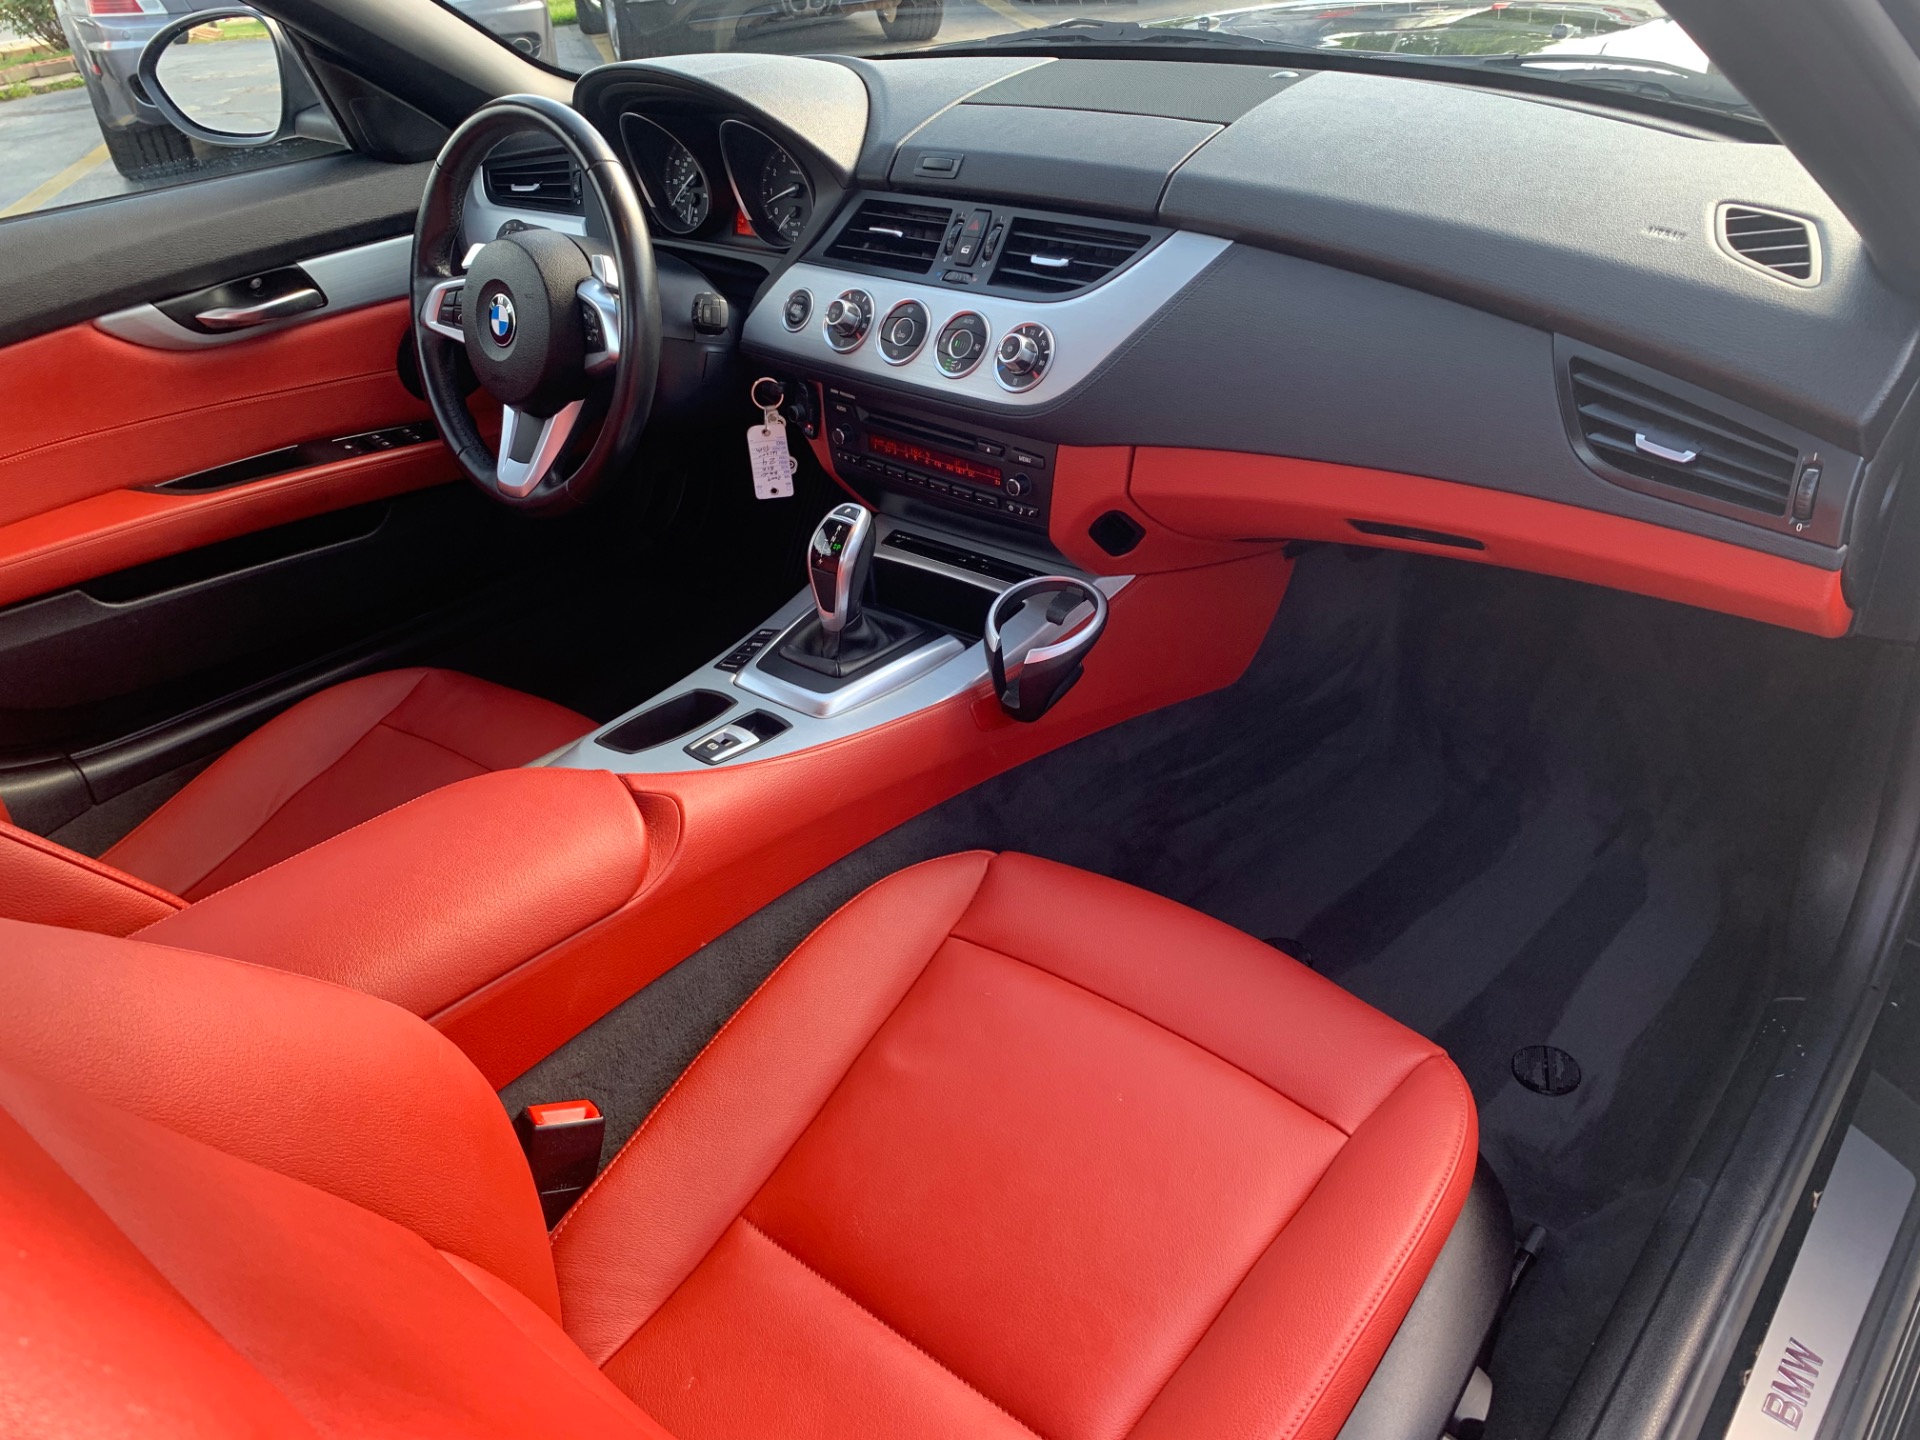 Used-2009-BMW-Z4-sDrive35i-Hardtop-Convertible